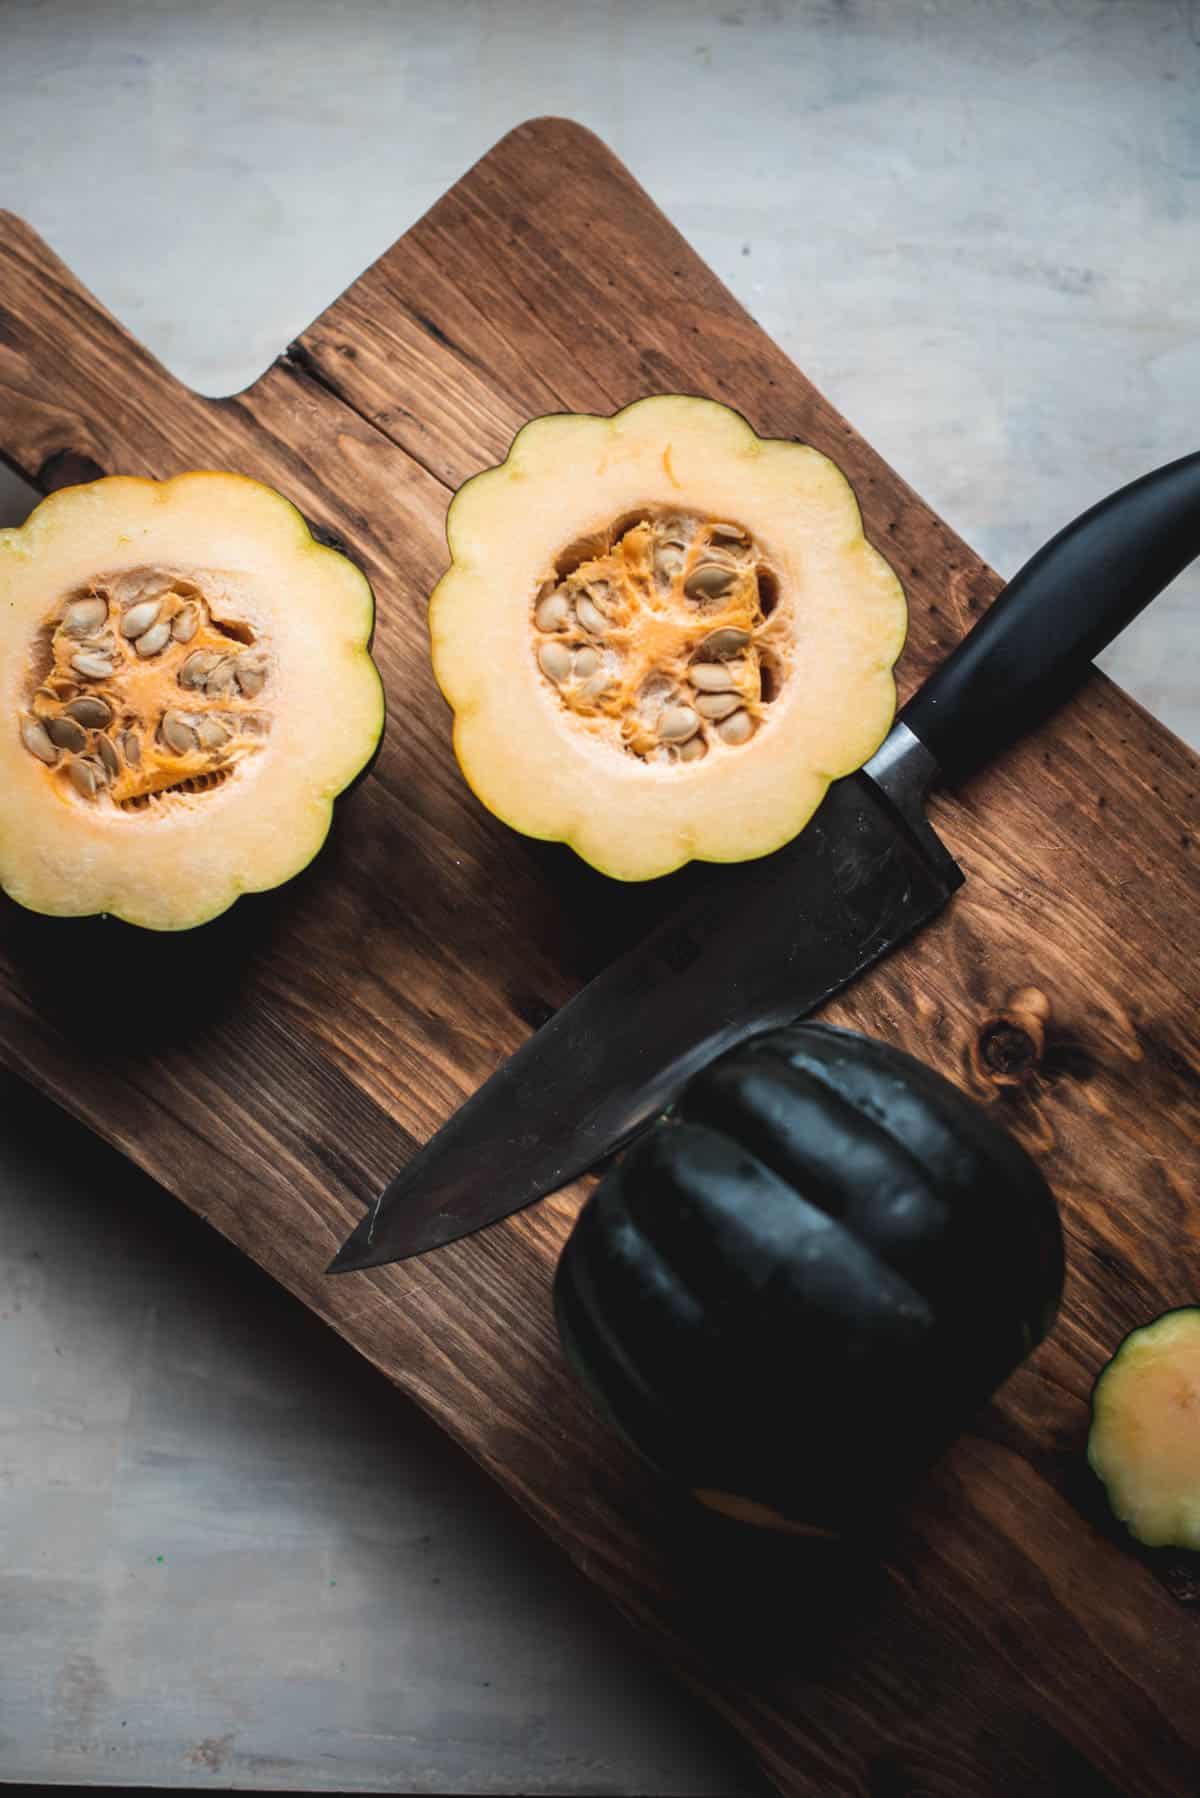 An acorn squash has been cut in half and sitting on a wooden chopping board. The half pieces of squash are still filled with seeds and another squash is whole on the chopping board, ready to be slice by the knife resting next to it.